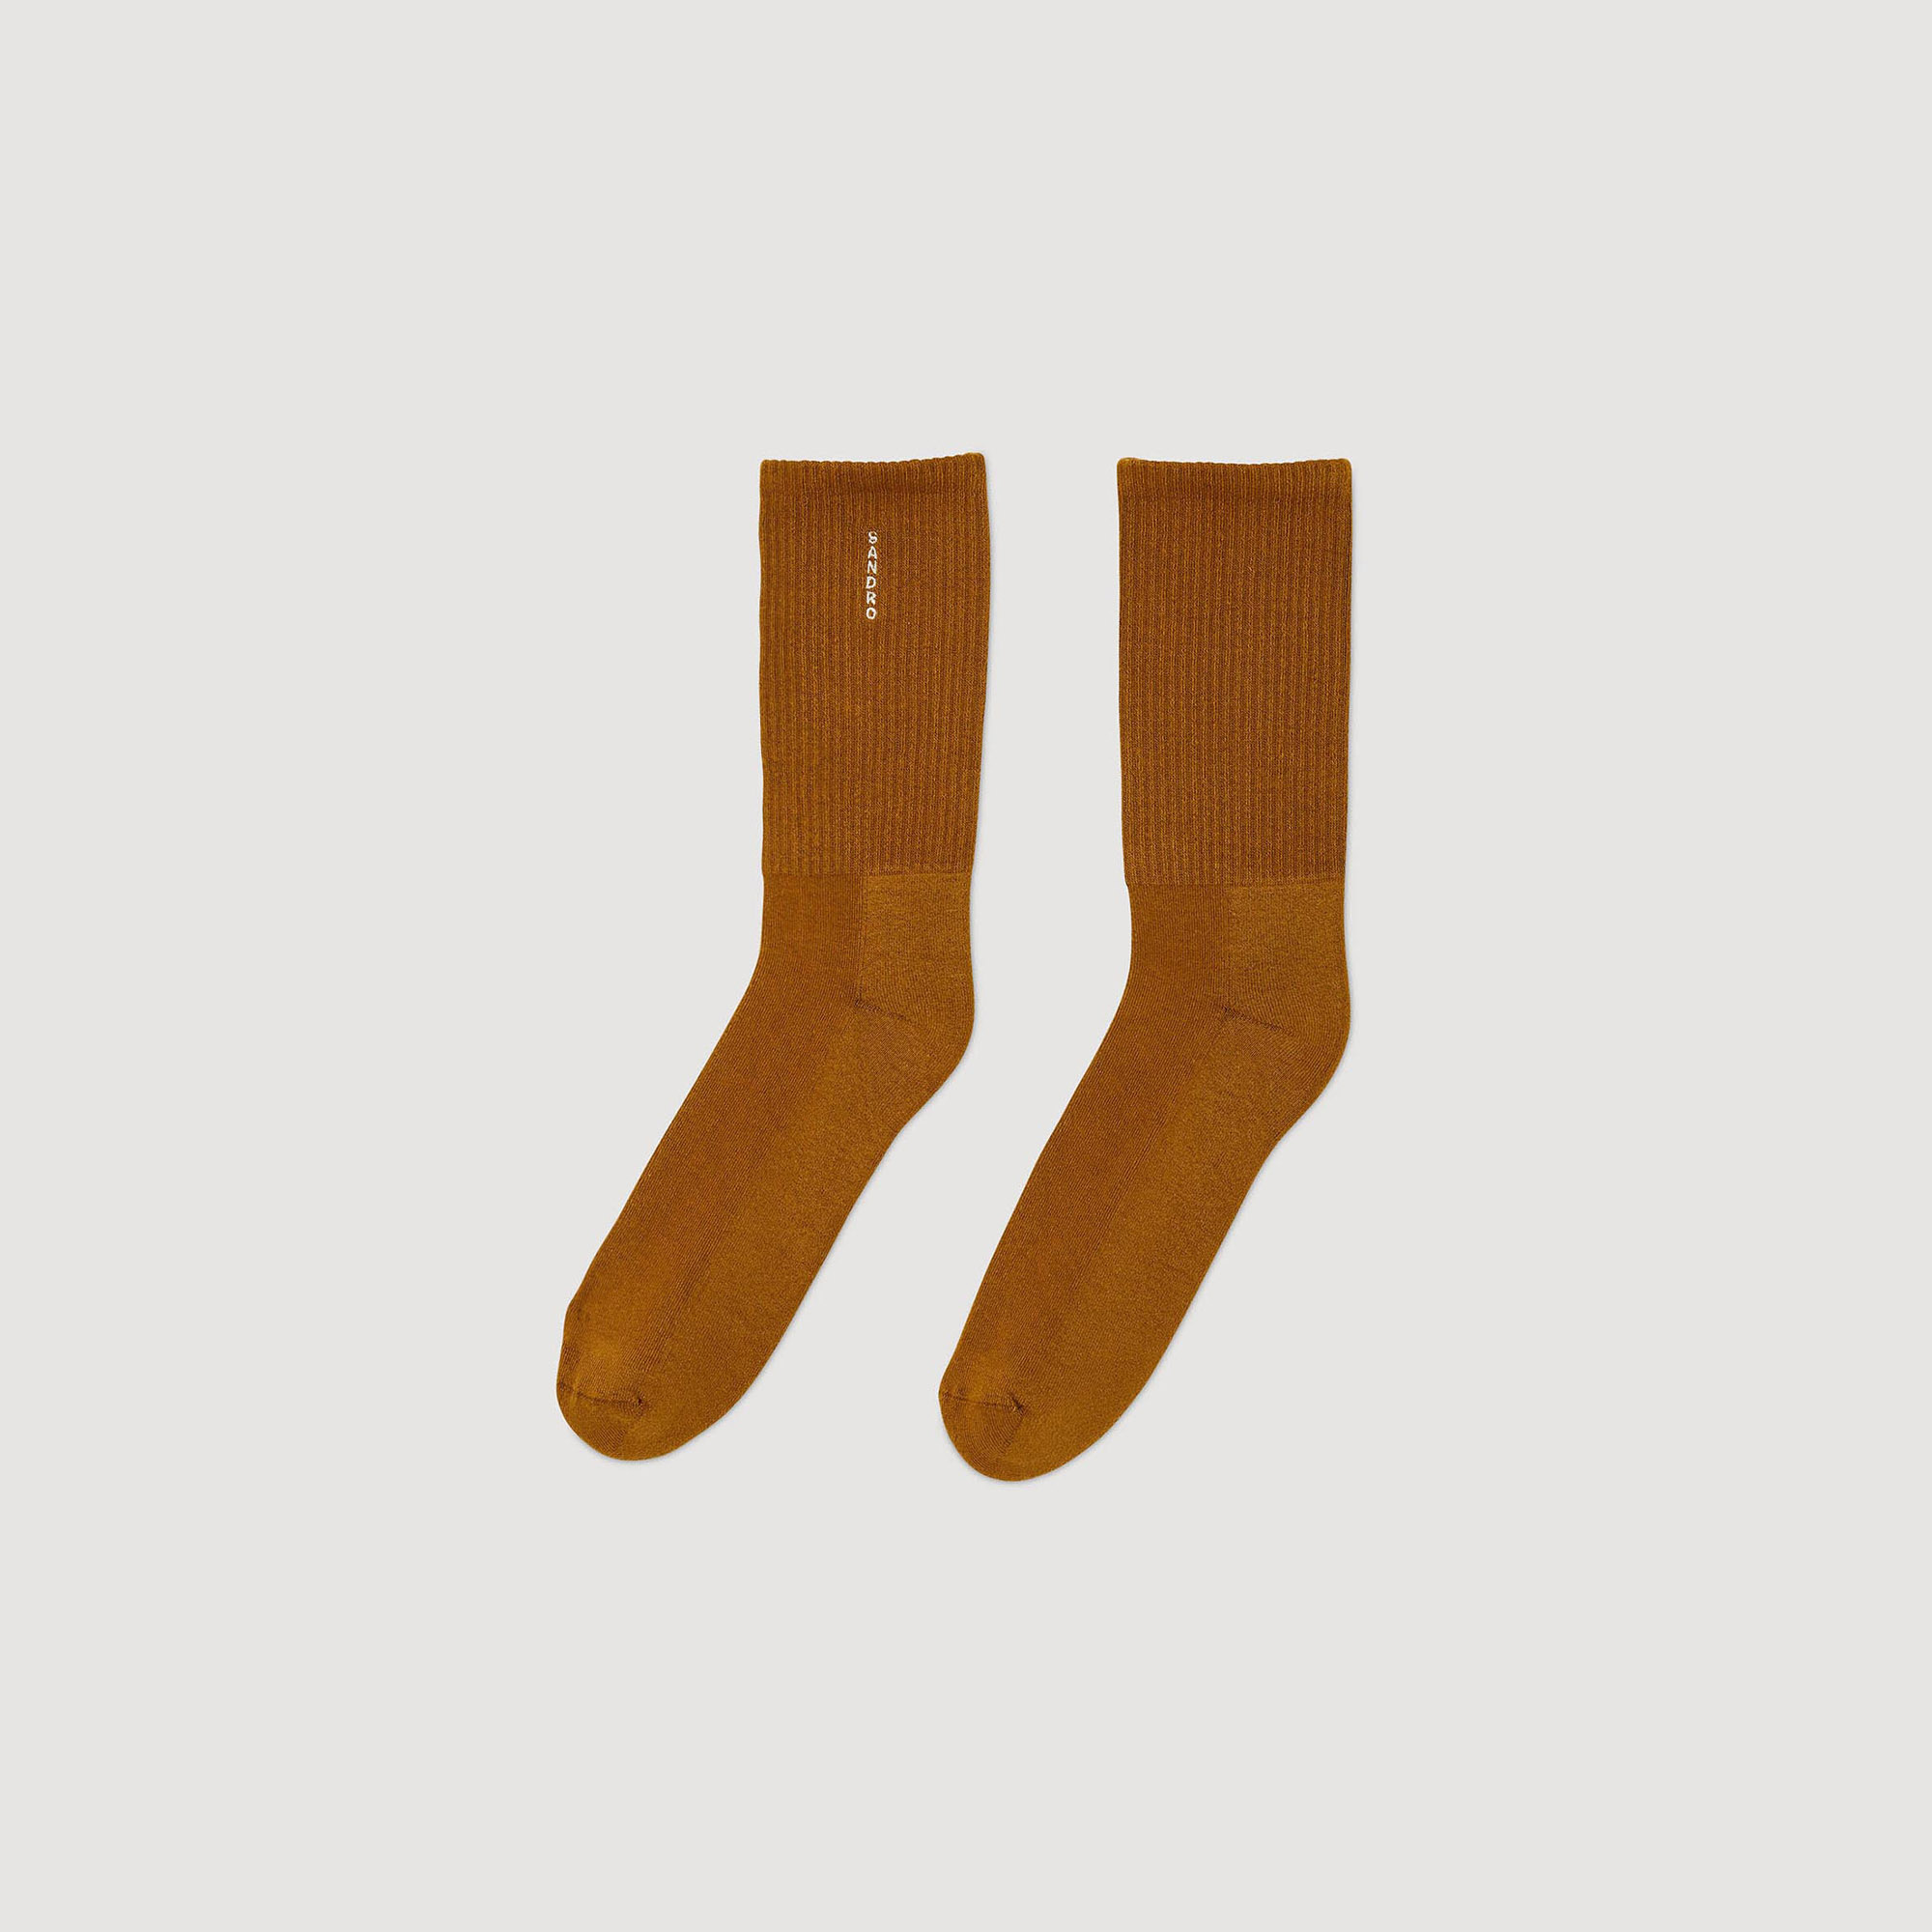 Sandro cotton Cotton socks embellished with vertical Sandro embroidery